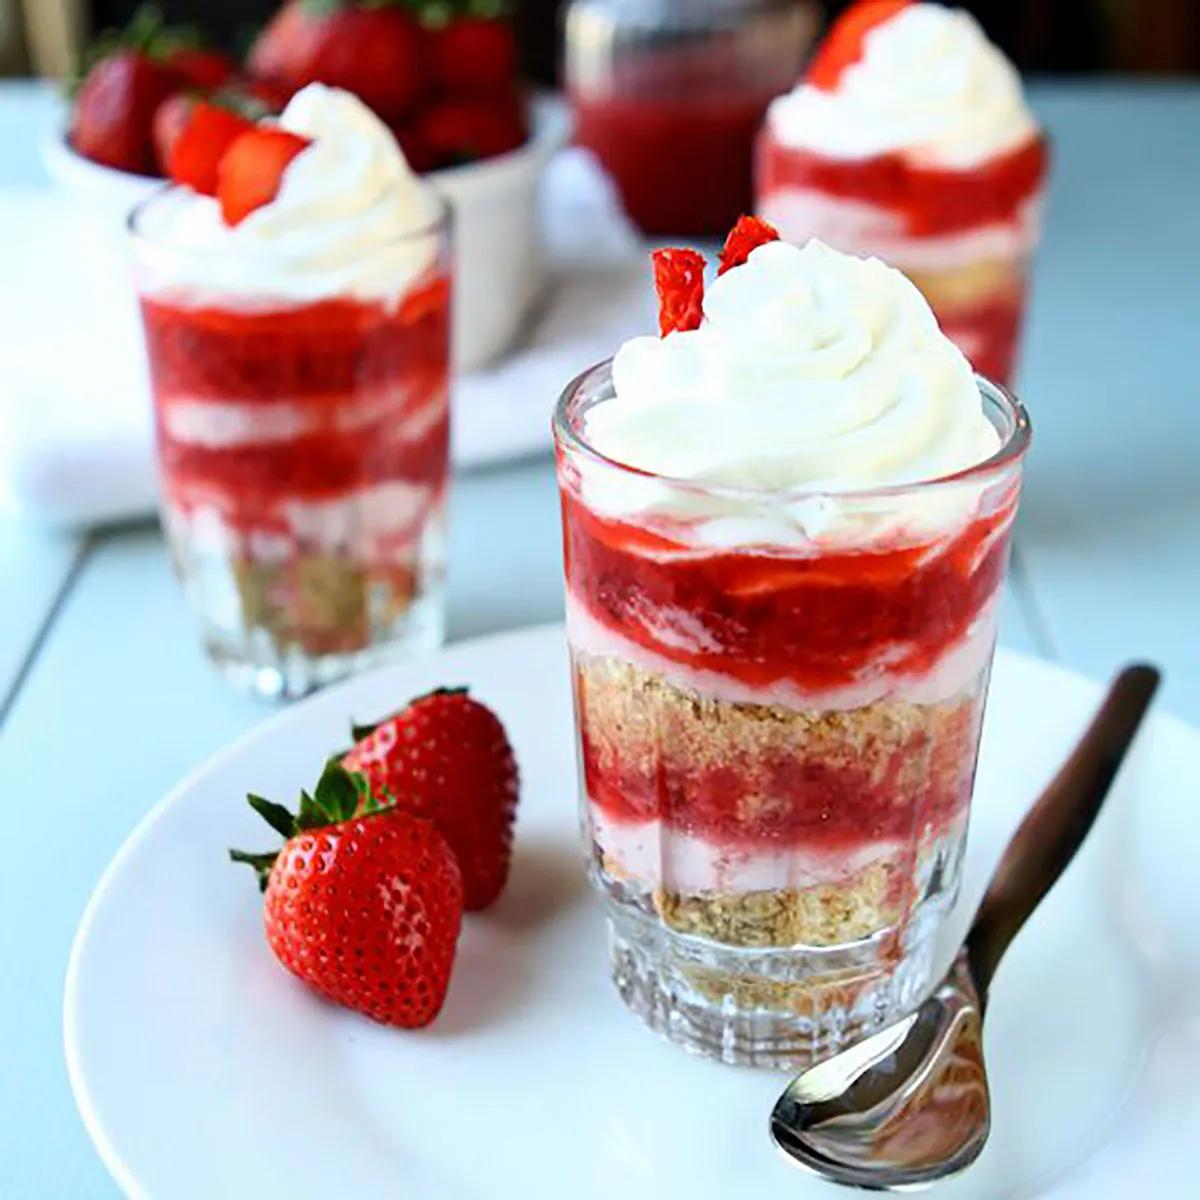 Strawberry Cream Parfait - Heavenly Home Cooking